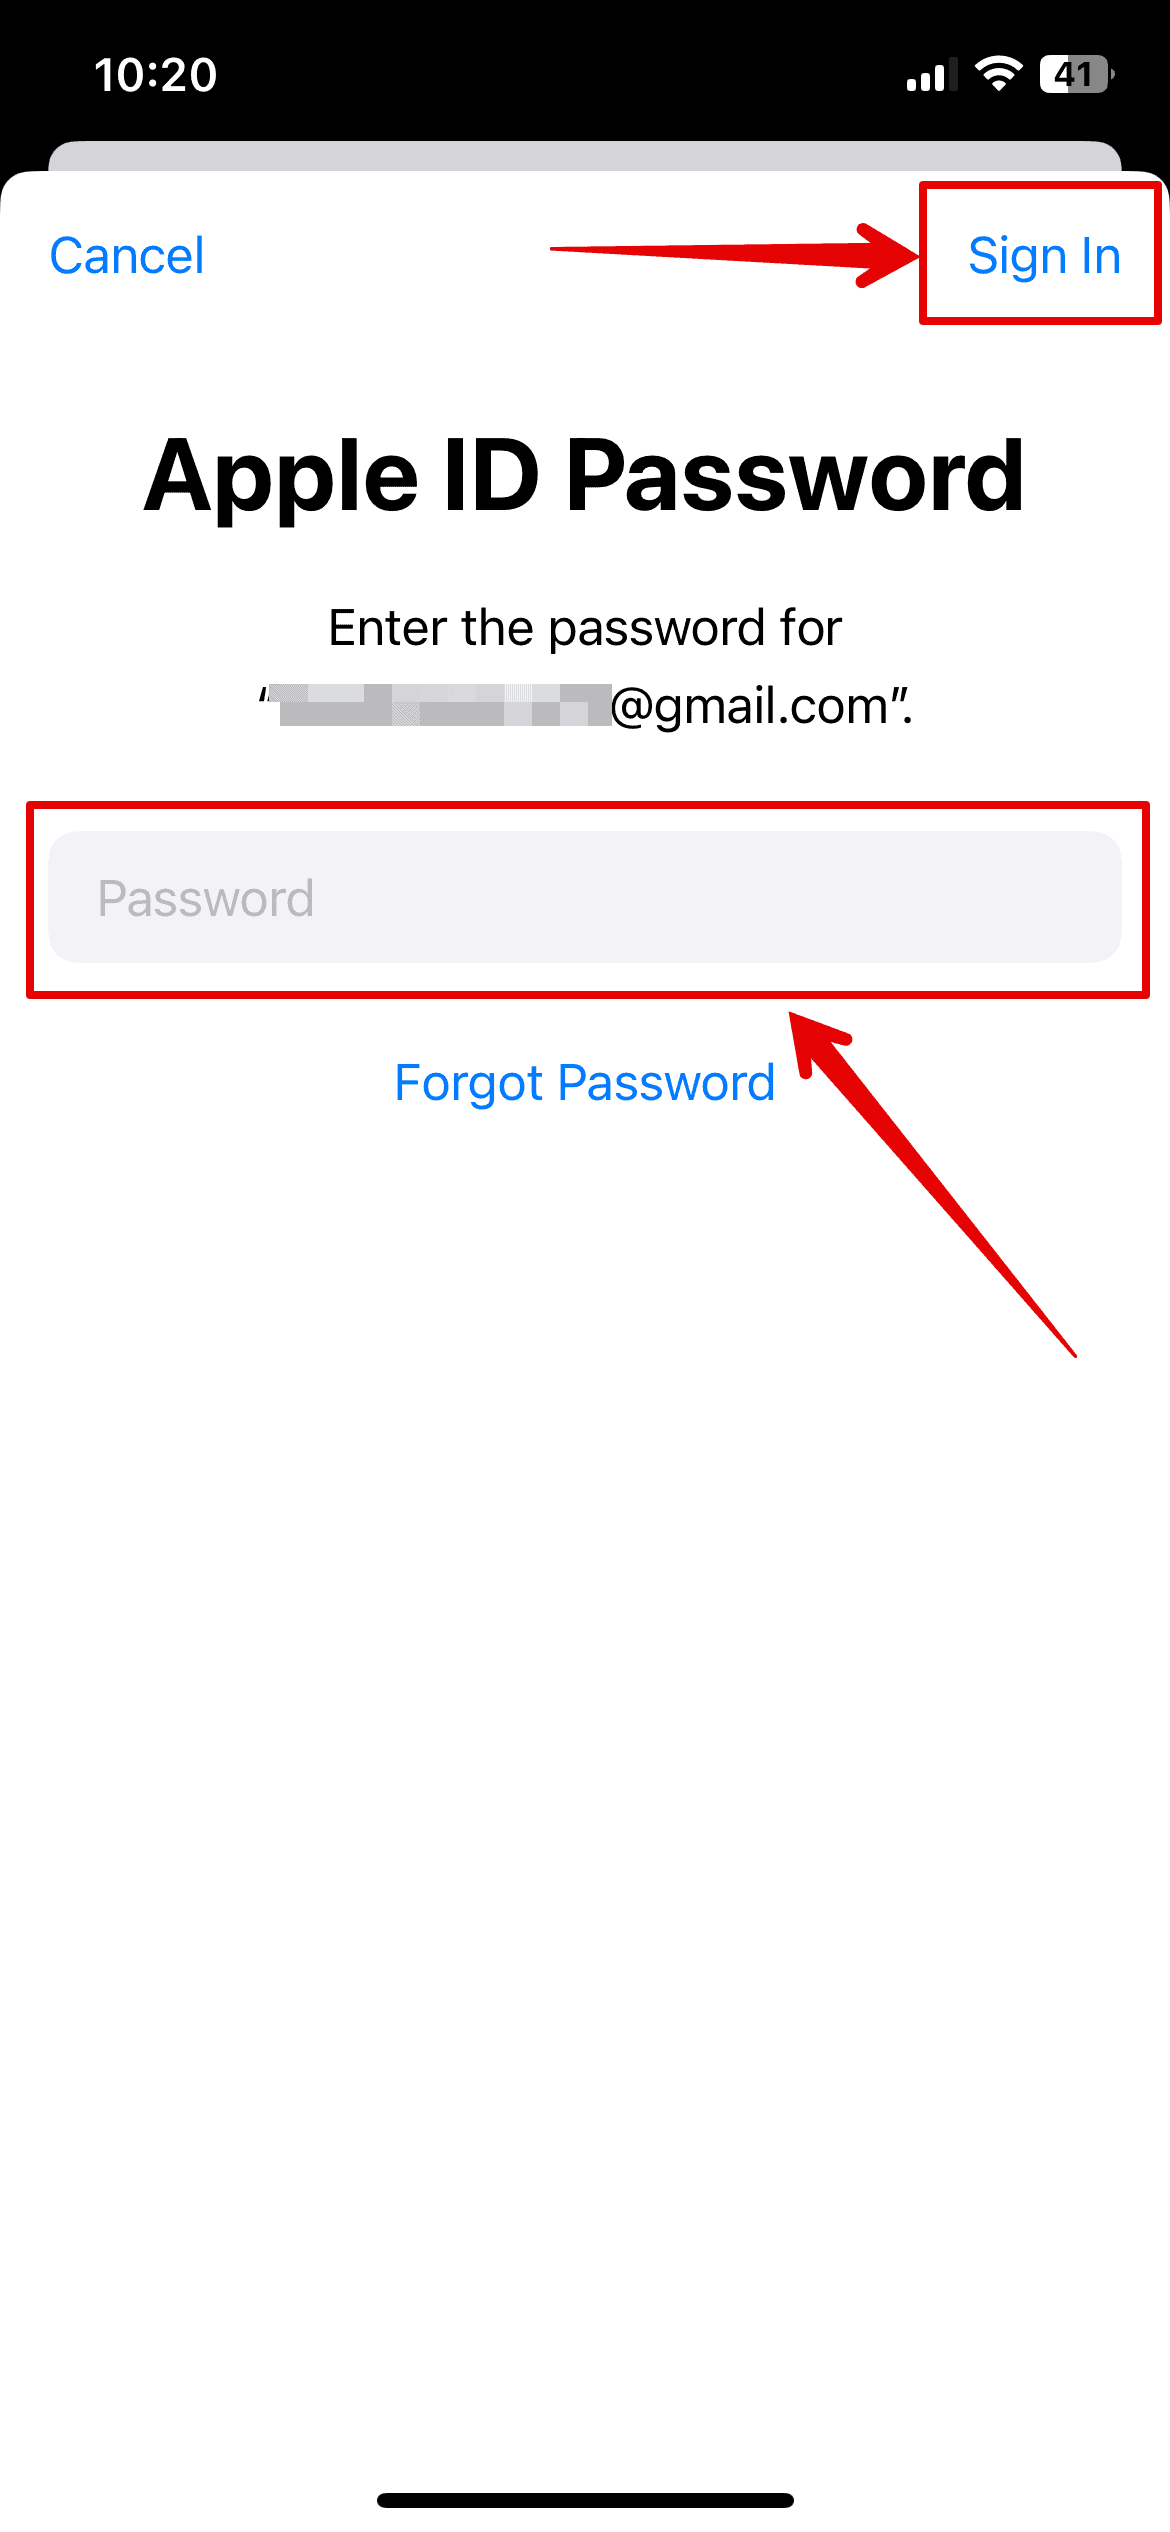 Enter Apple ID password and Sign In